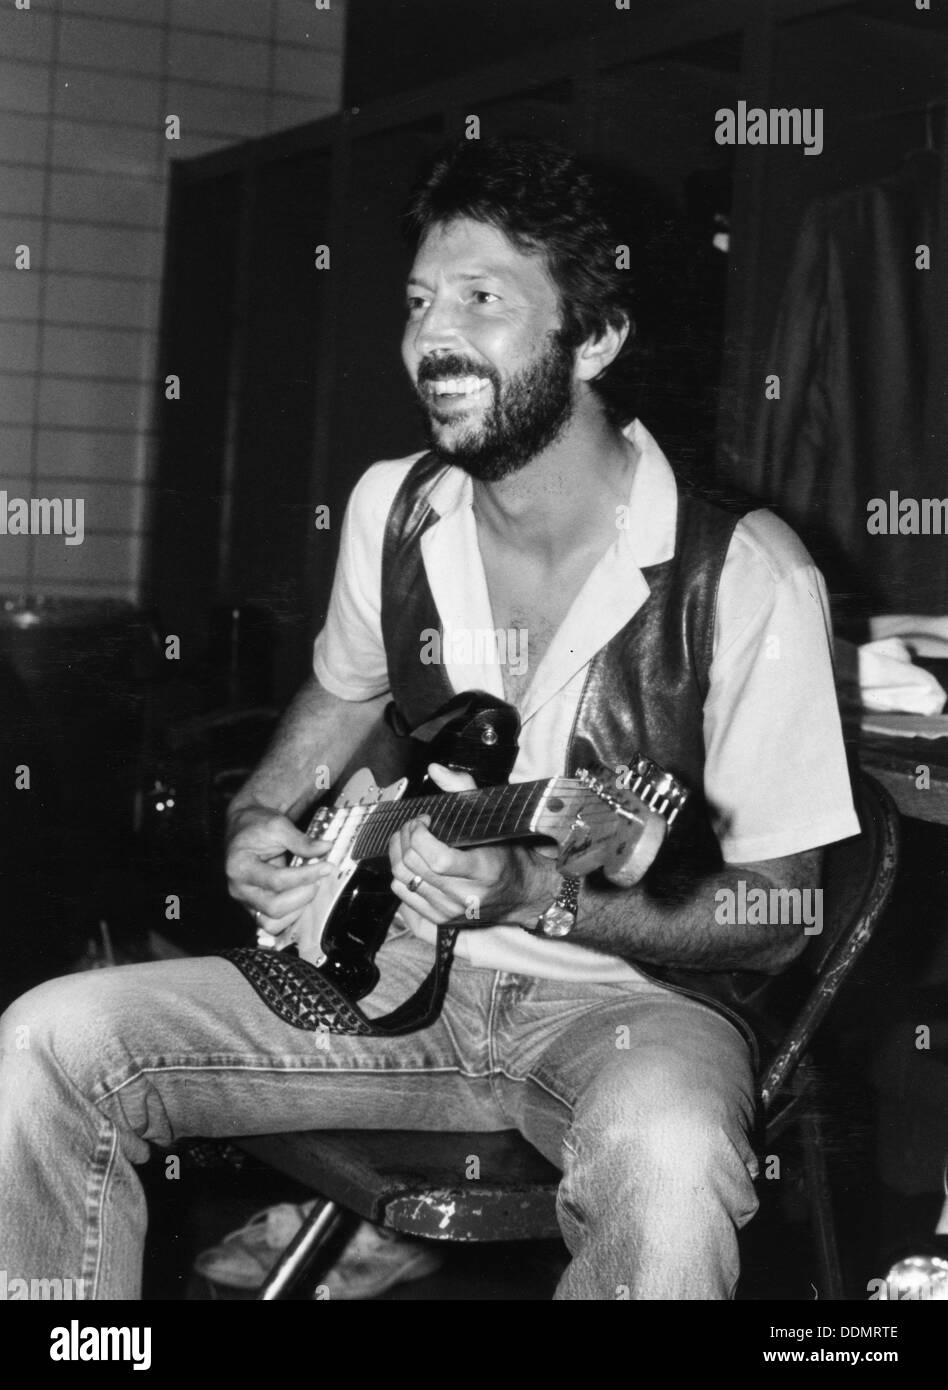 Eric clapton hi-res stock photography and images - Alamy